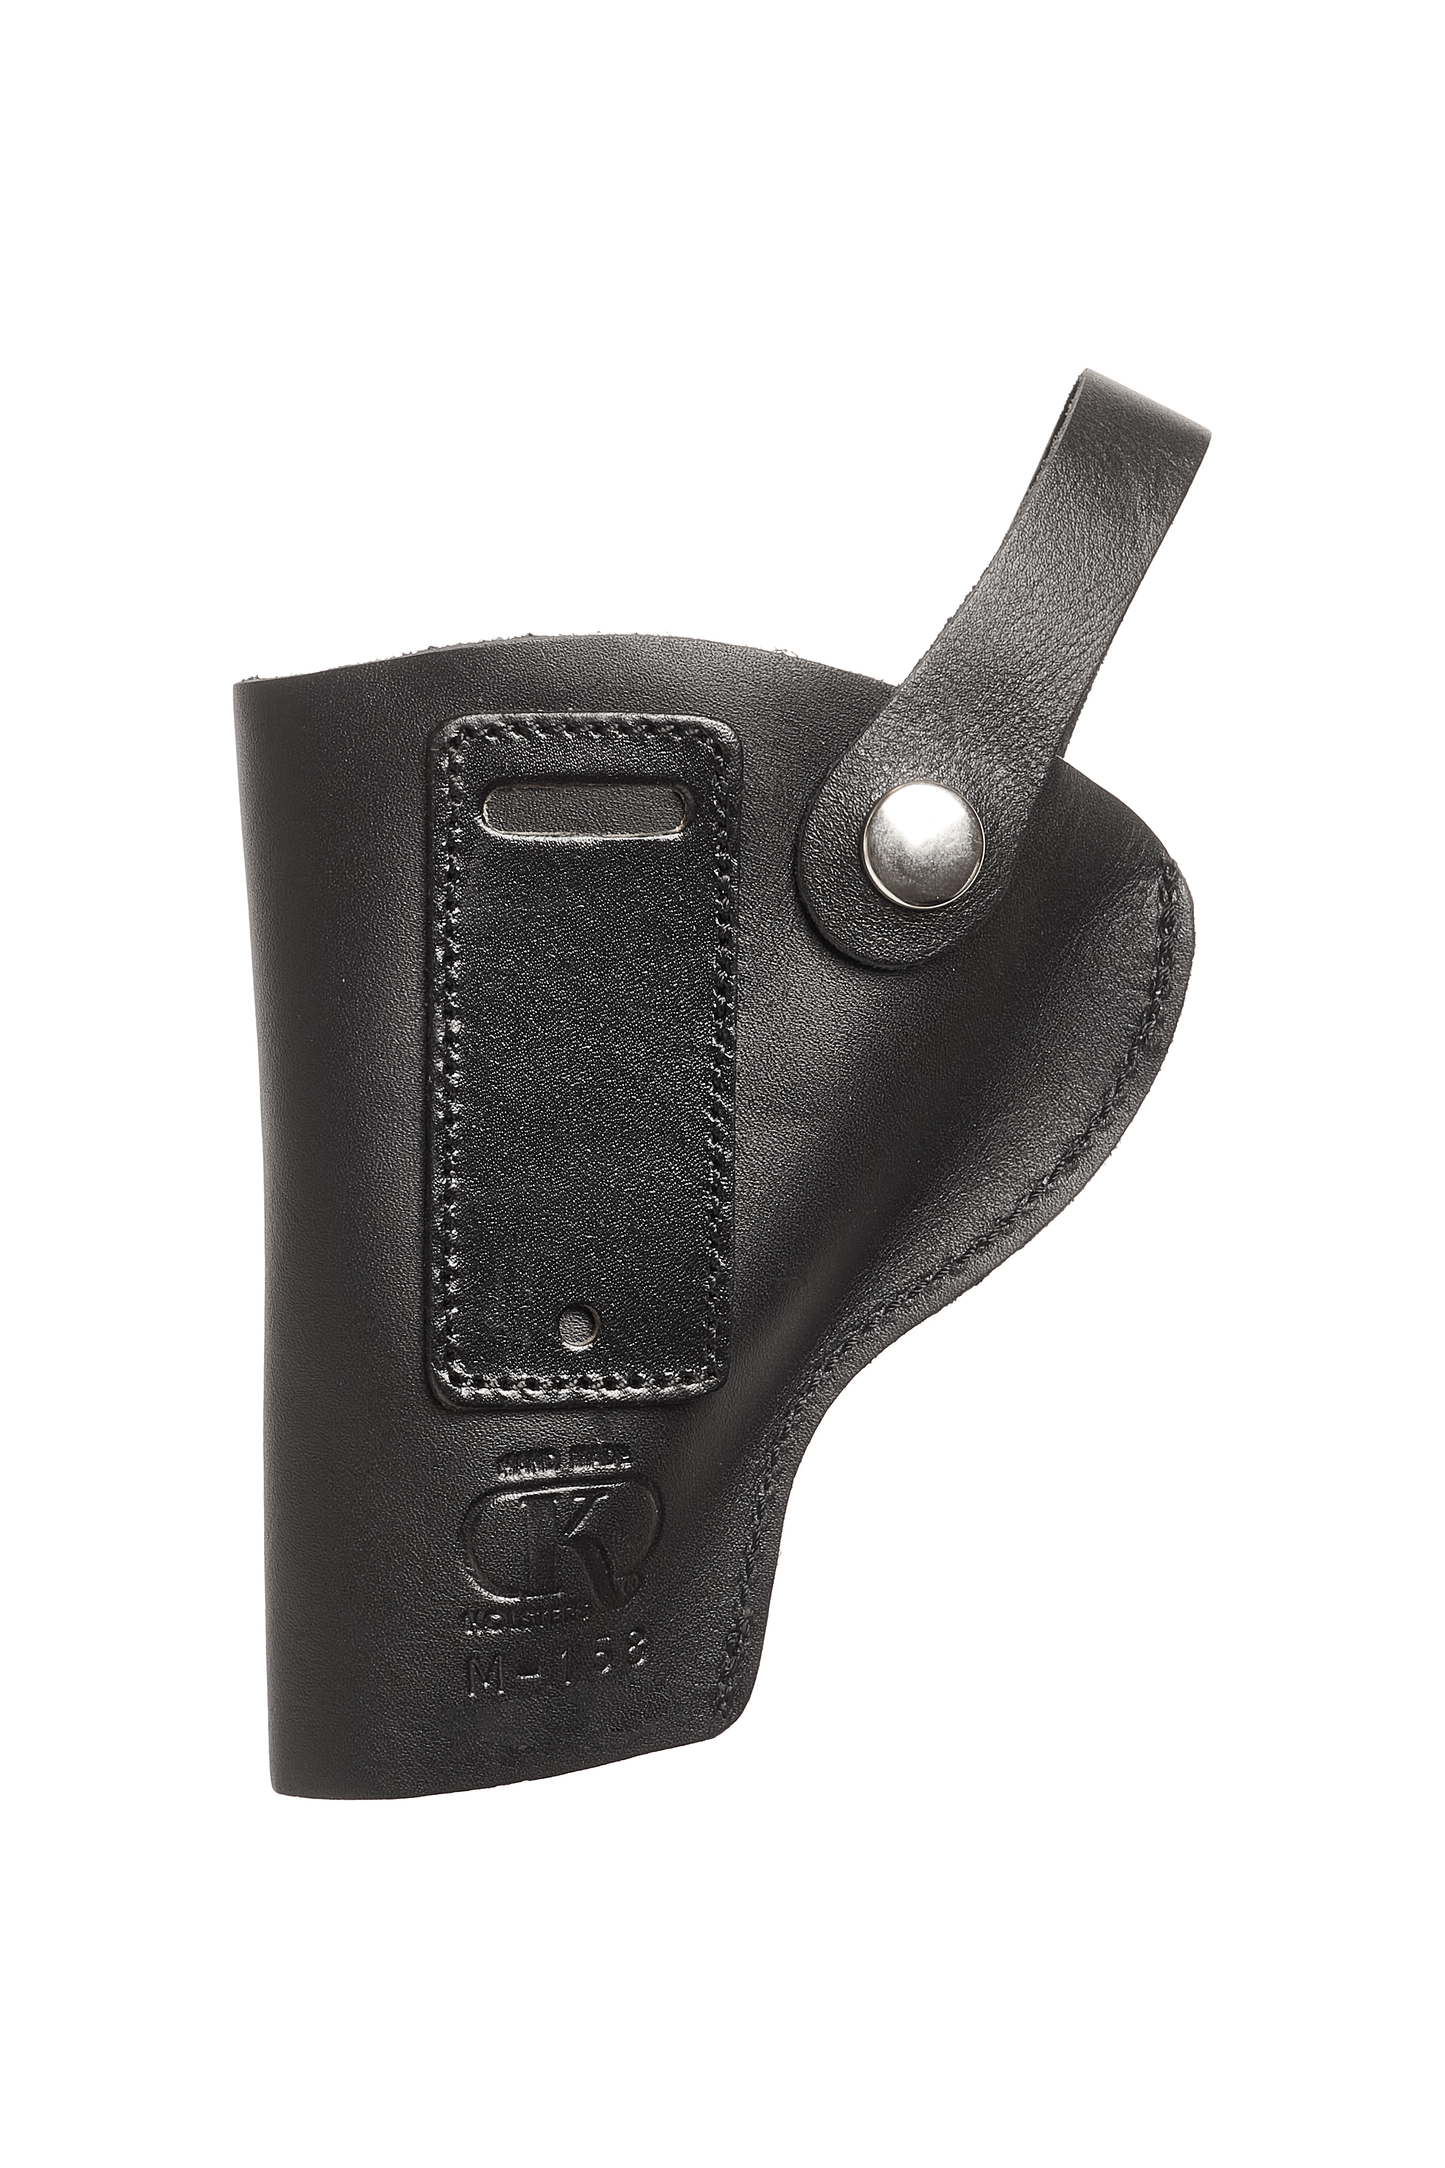 357 Magnum IWB Leather Holster with Belt Clip (KM158)